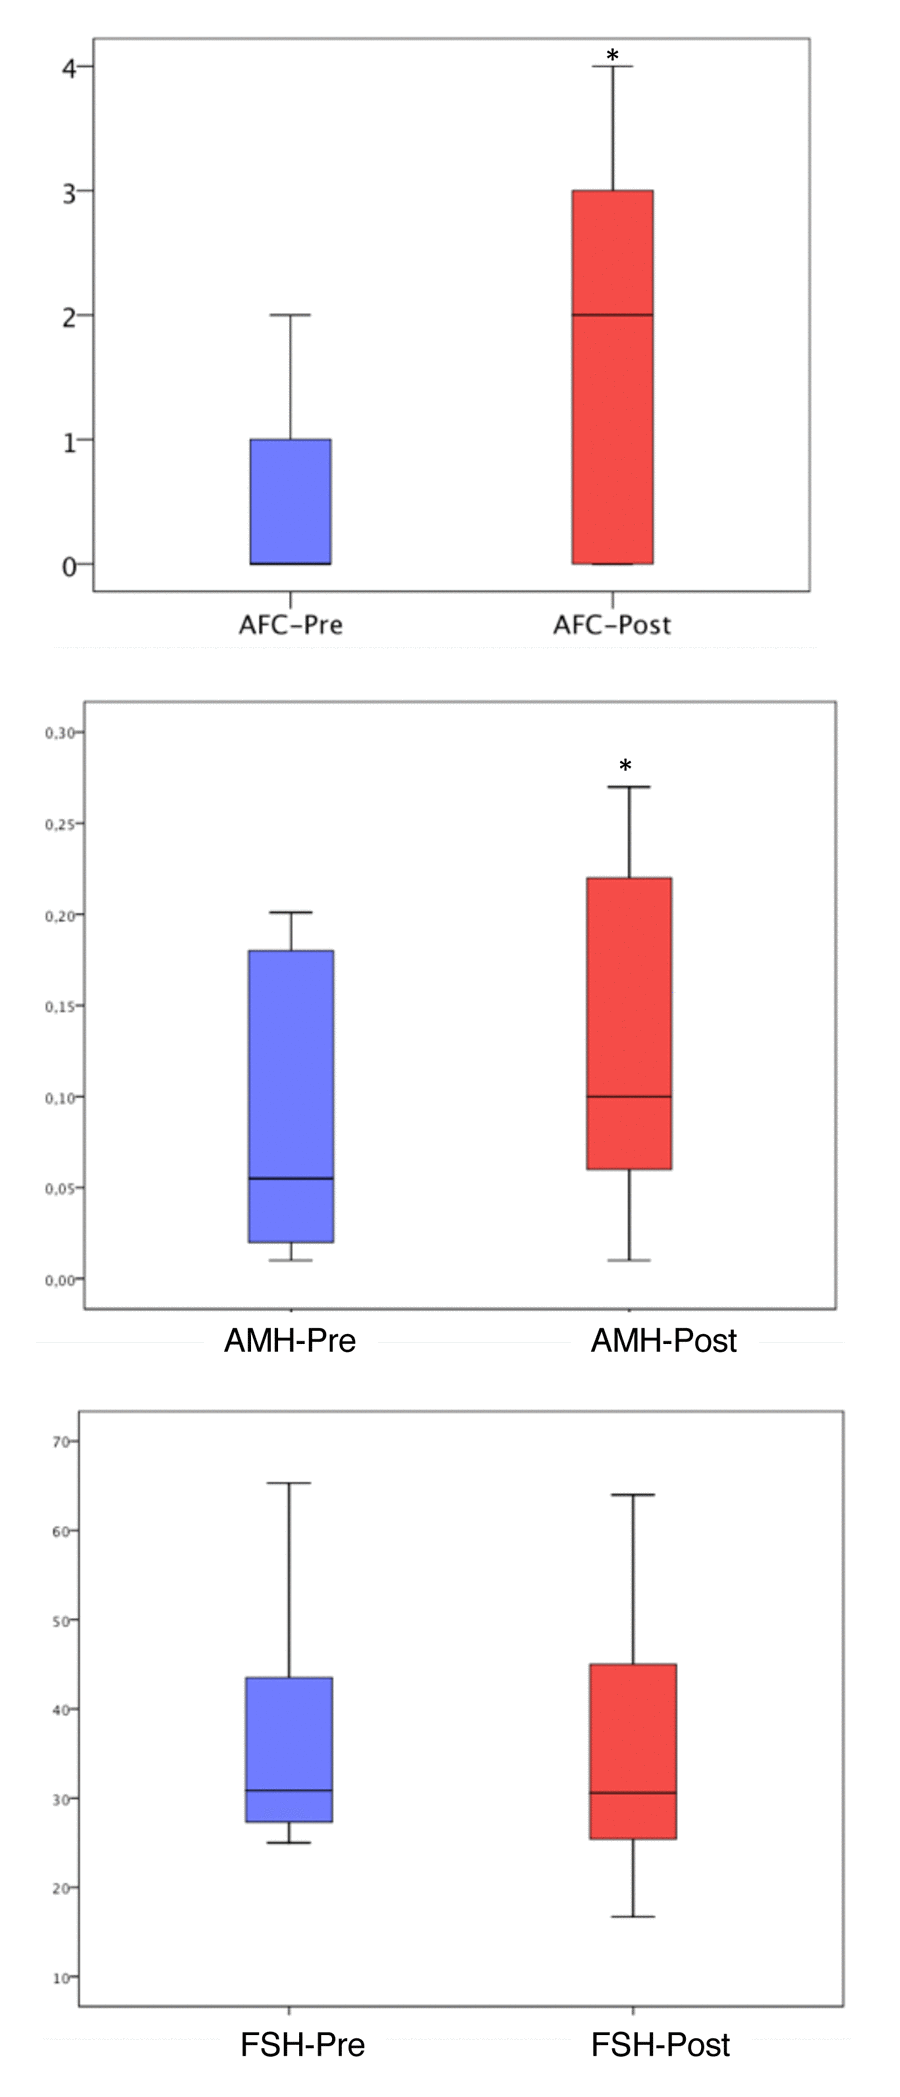 Antral follicle count, AMH and FSH levels before and after PRP injection. The ends of the boxes are the upper and lower quartiles, so the box spans the interquartile range (25th to 75th percentile). The horizontal line inside the boxplot represents the median value. The whiskers extend between 5%-95%. *: P